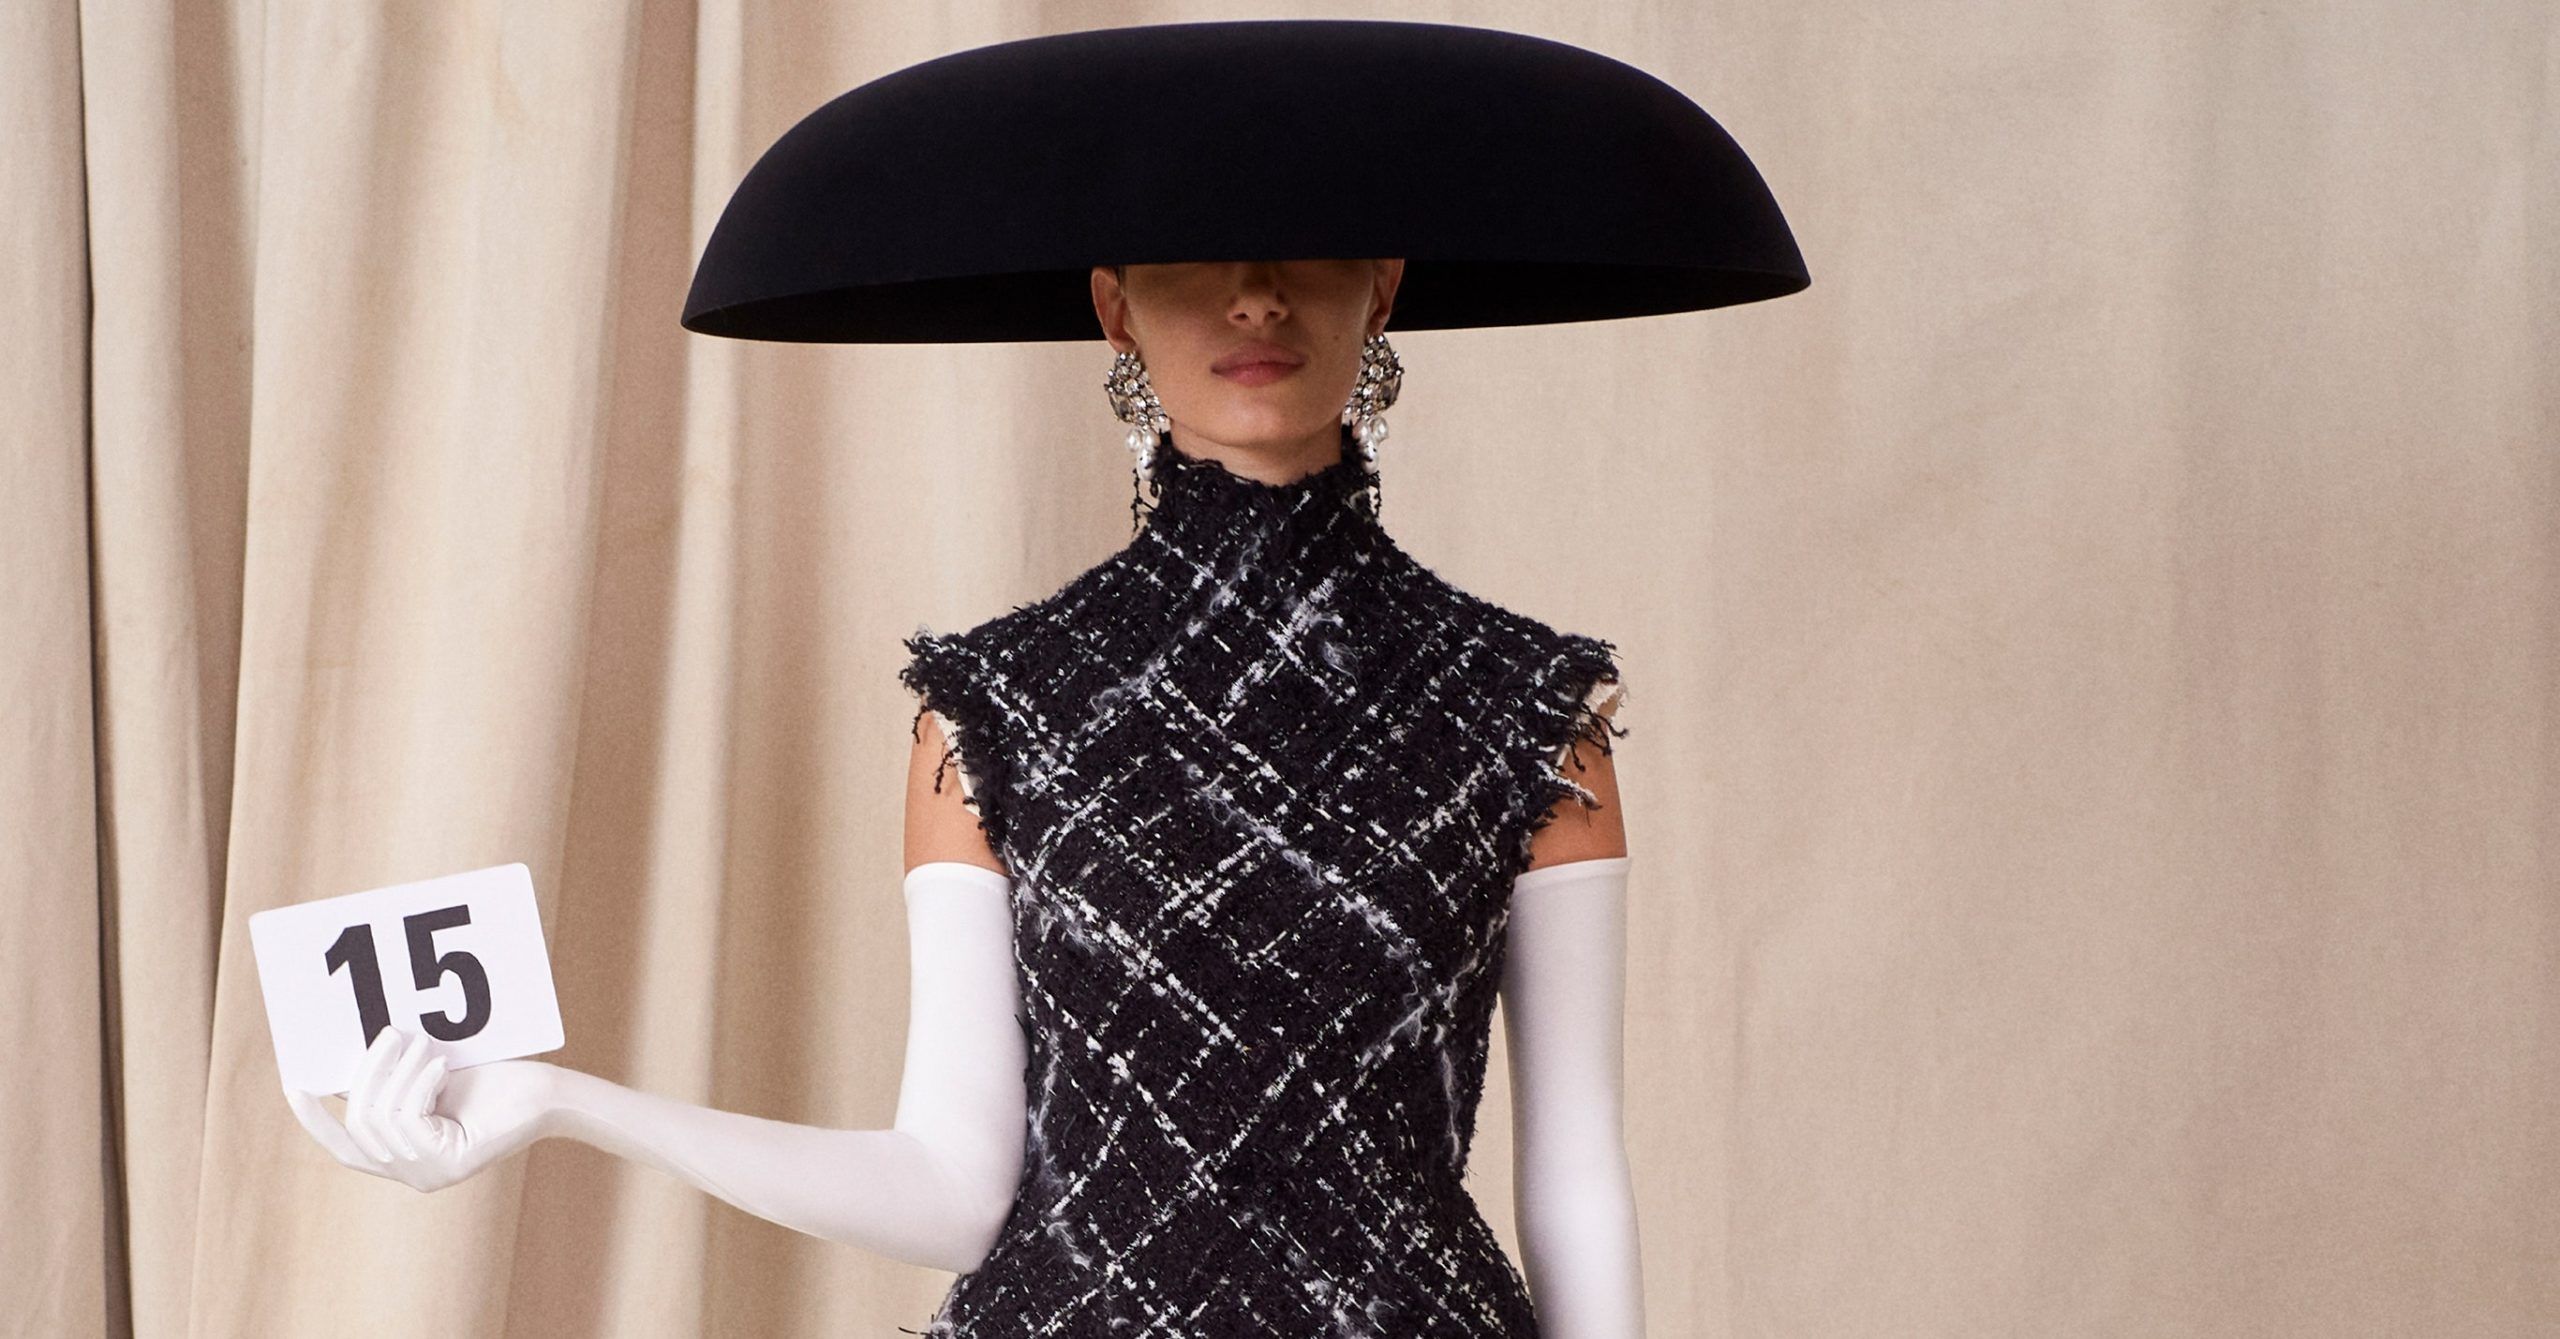 Balenciaga stages its first haute couture fashion show in over 50 years